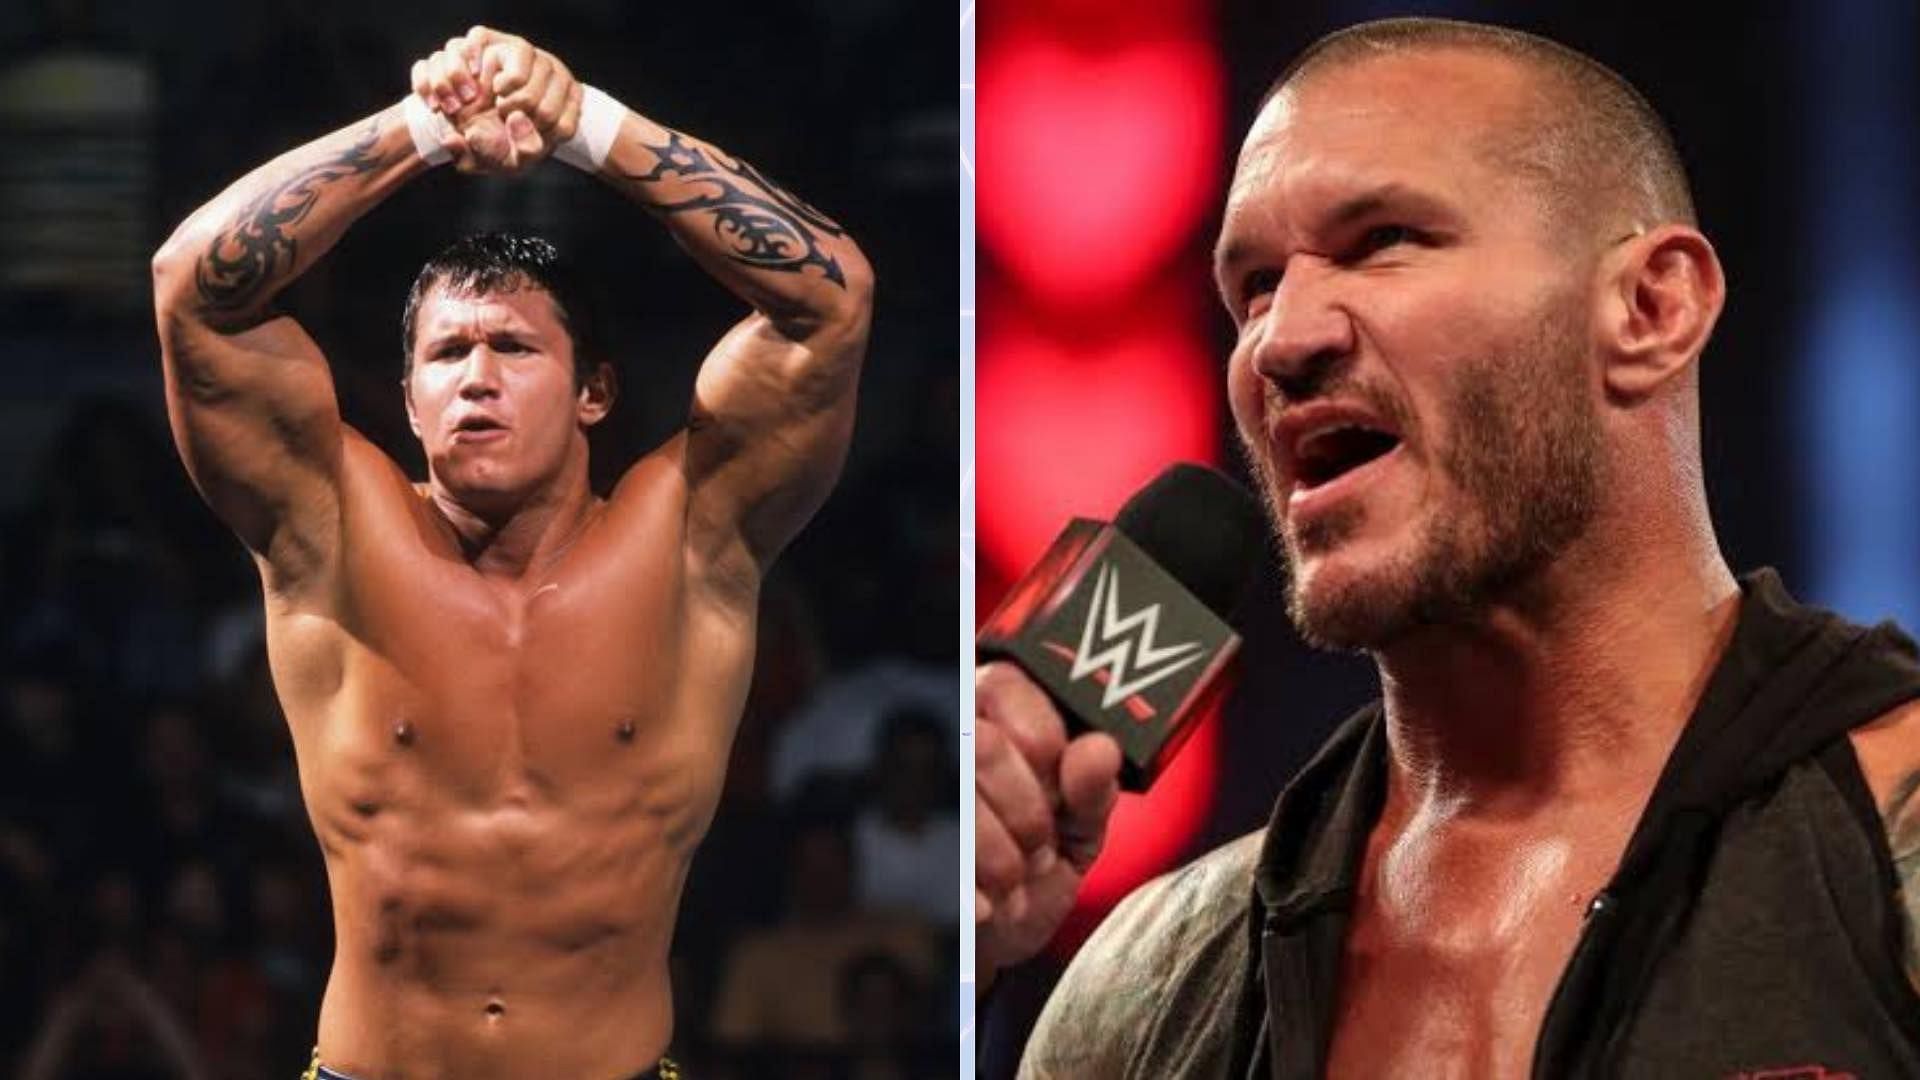 WWE Superstar Randy Orton could be on his way for a comeback this 2023.